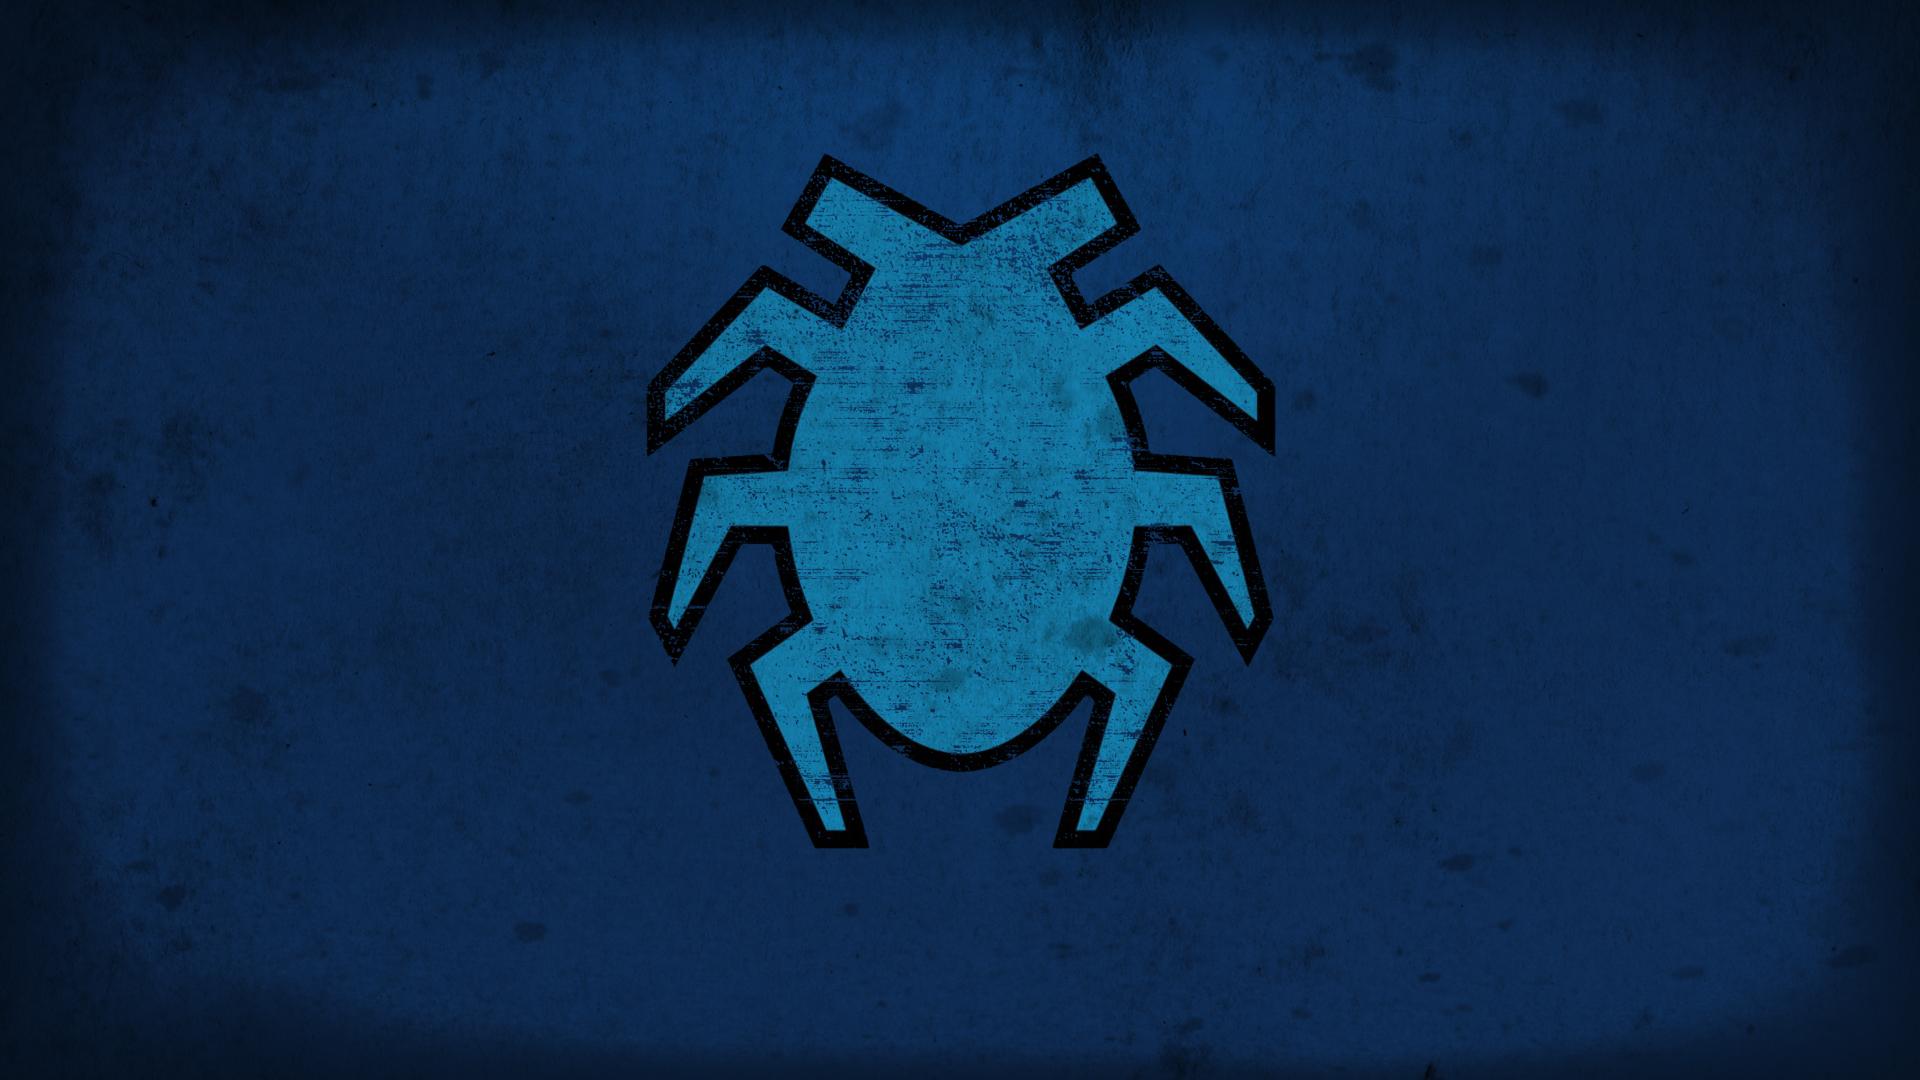 Awesome OC Blue Beetle wallpaper from / r / Comicwalls BlueBeetle